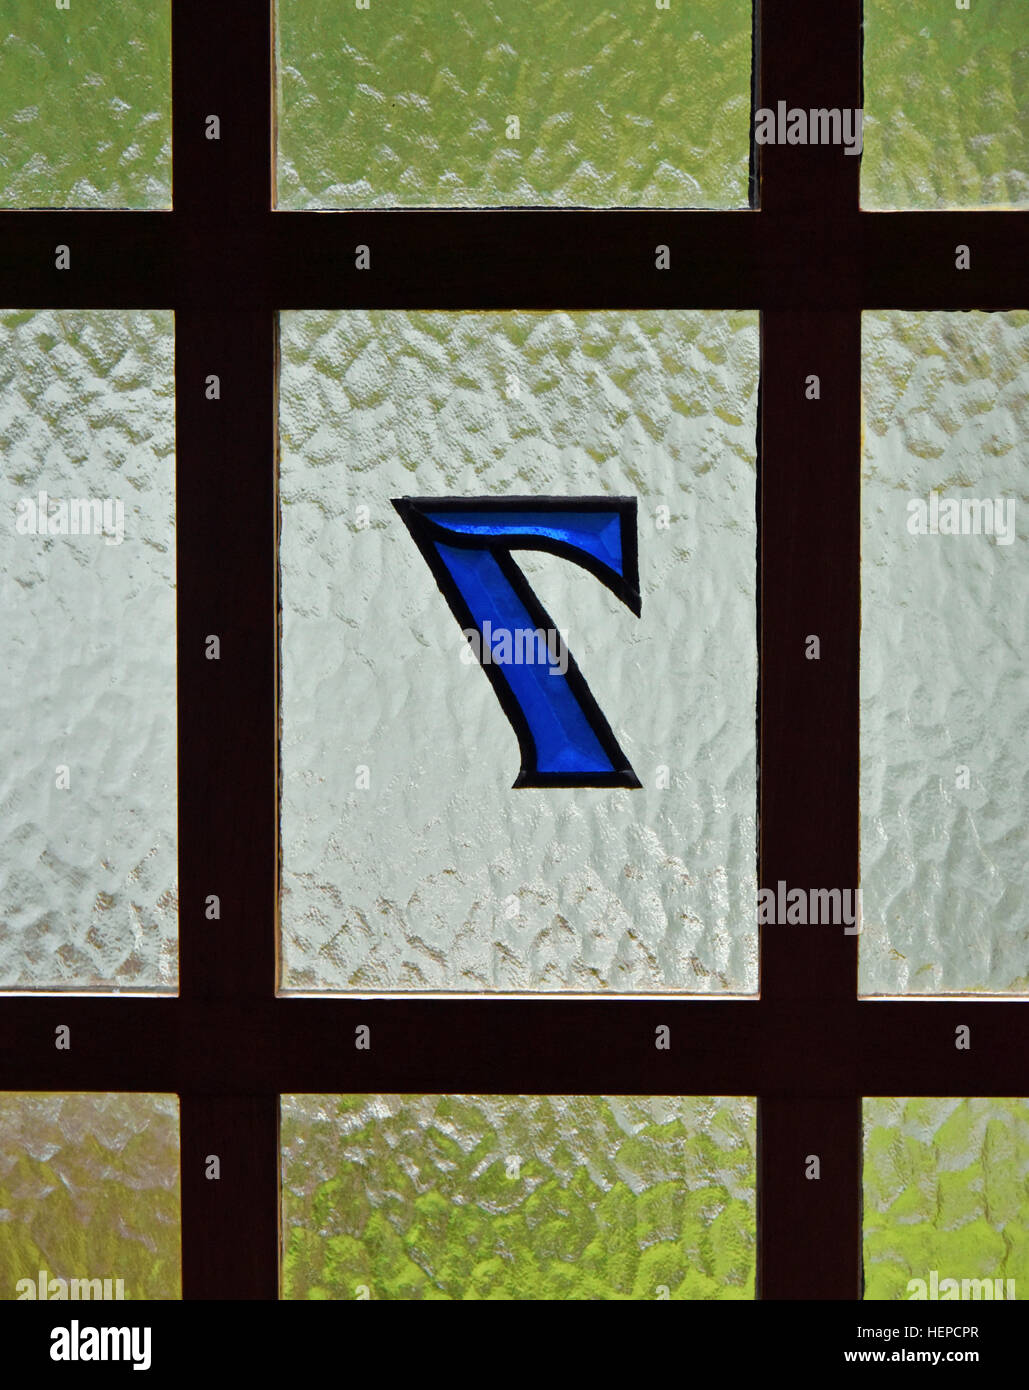 Detail of glass and wooden house door with Number 7, viewed from inside the house. Stock Photo